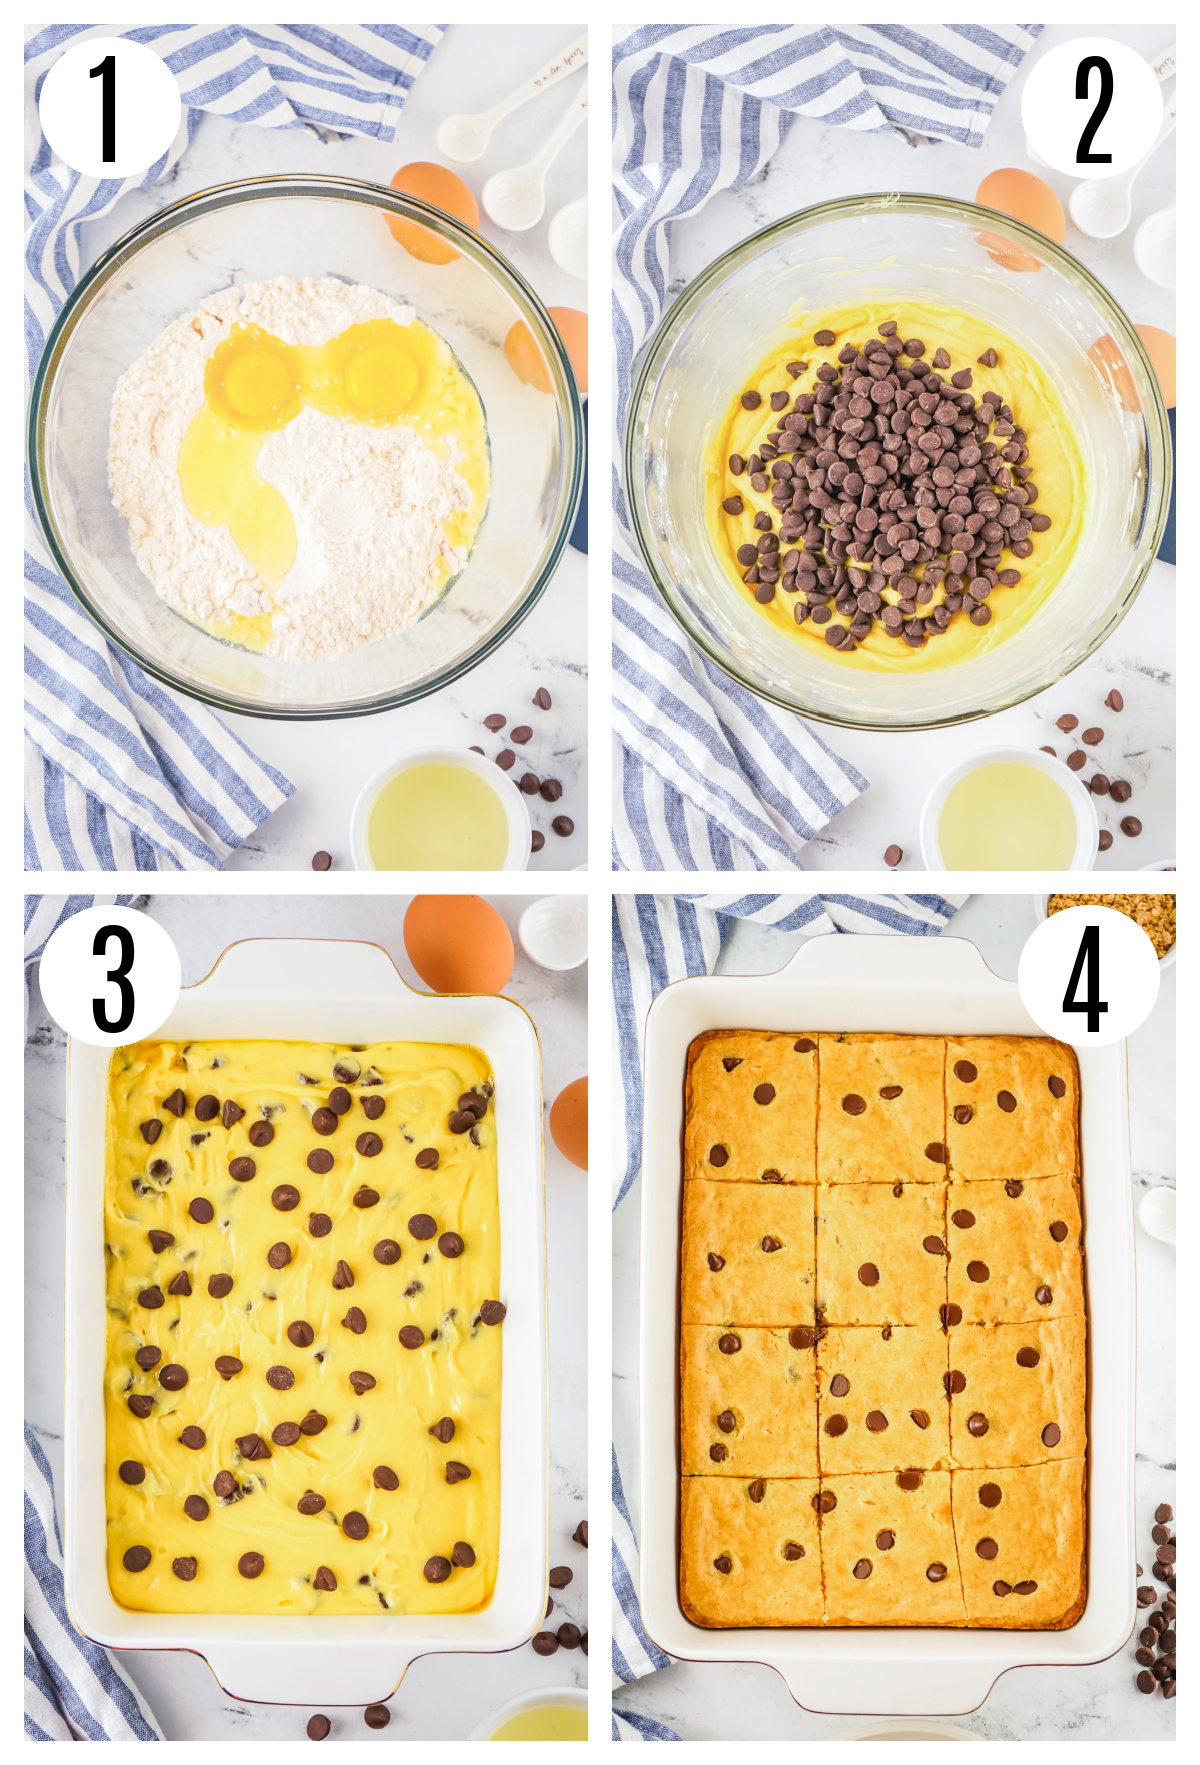 The steps to make the Chocolate Chip Cookie Bar with Cake Mix include adding the oil, water, cake mix and eggs to a large mixing bowl and combining them, folding in the chocolate chips, pouring the batter into a pan and baking the bars.